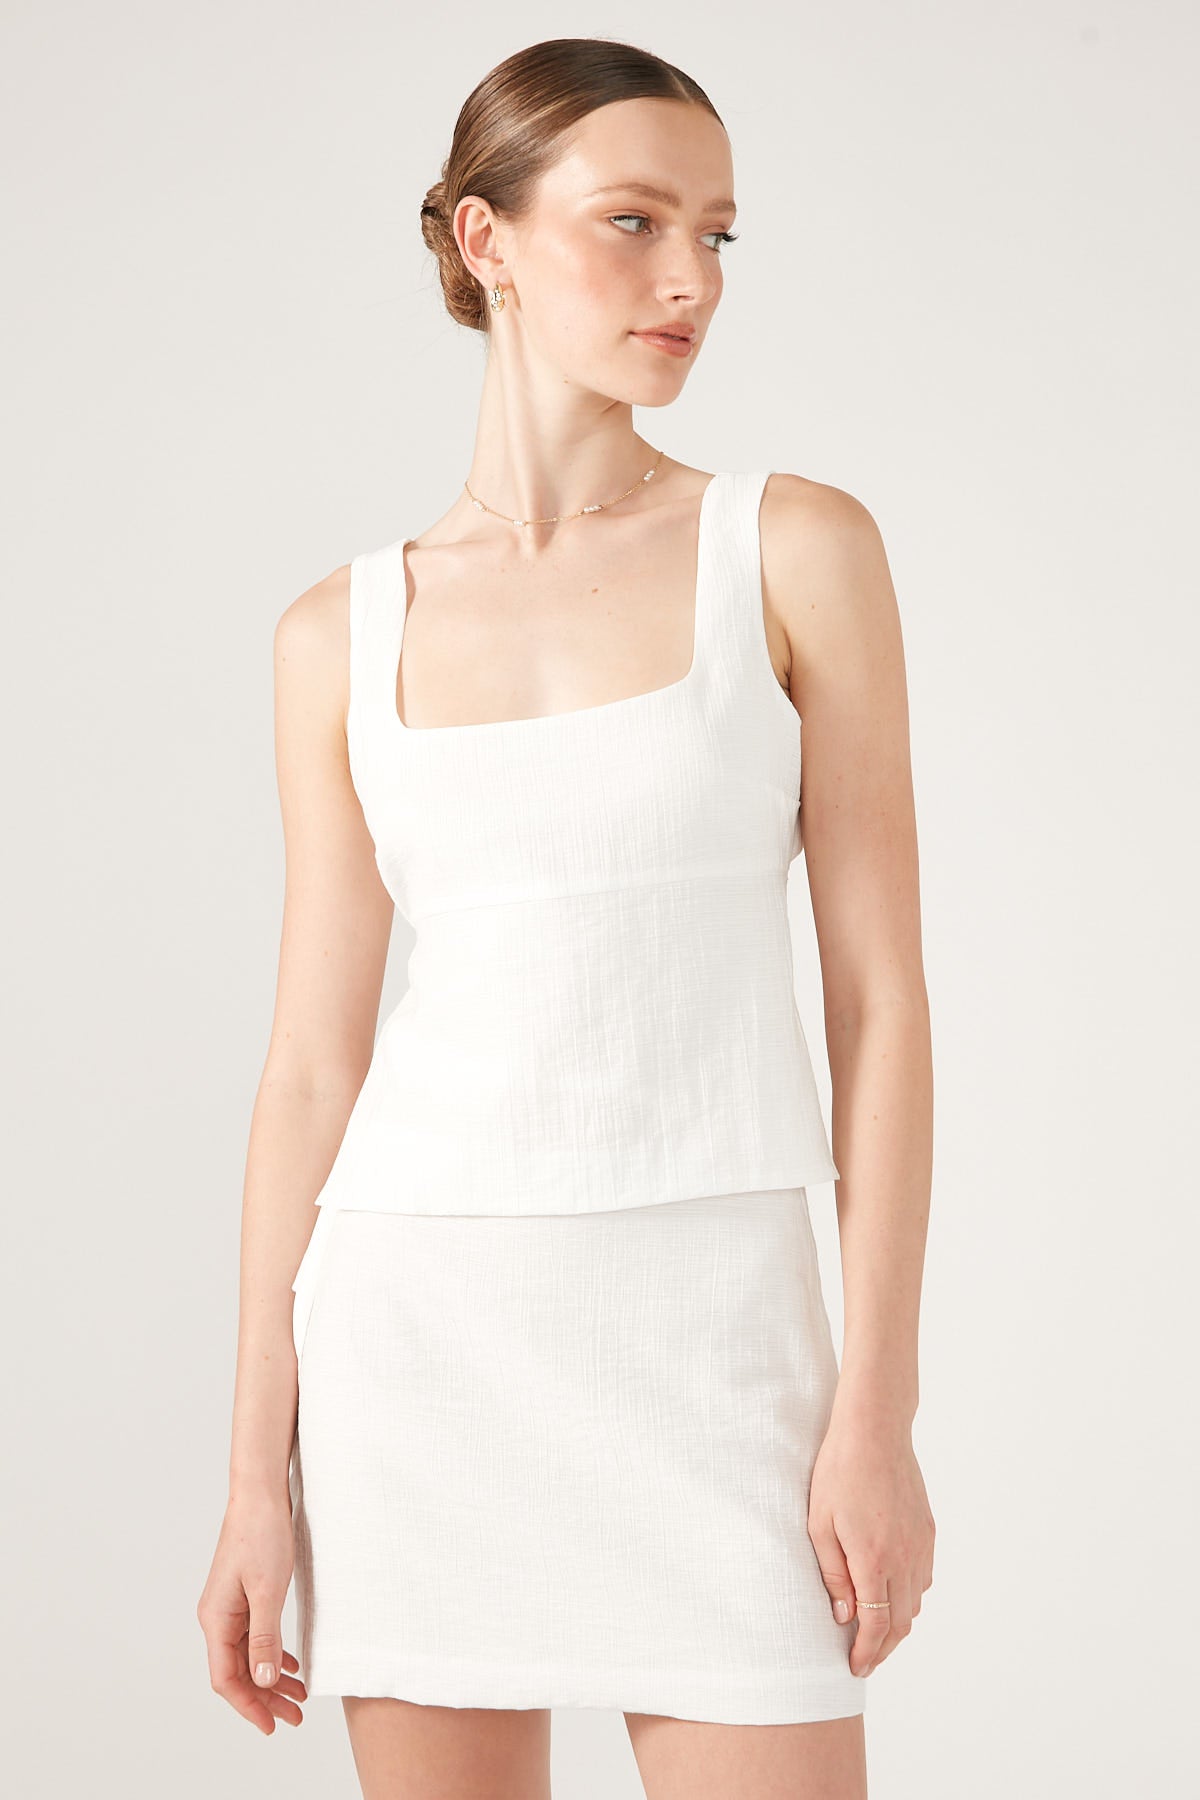 Perfect Stranger Dominique Elissa Golden Hour Backless Cami Top White